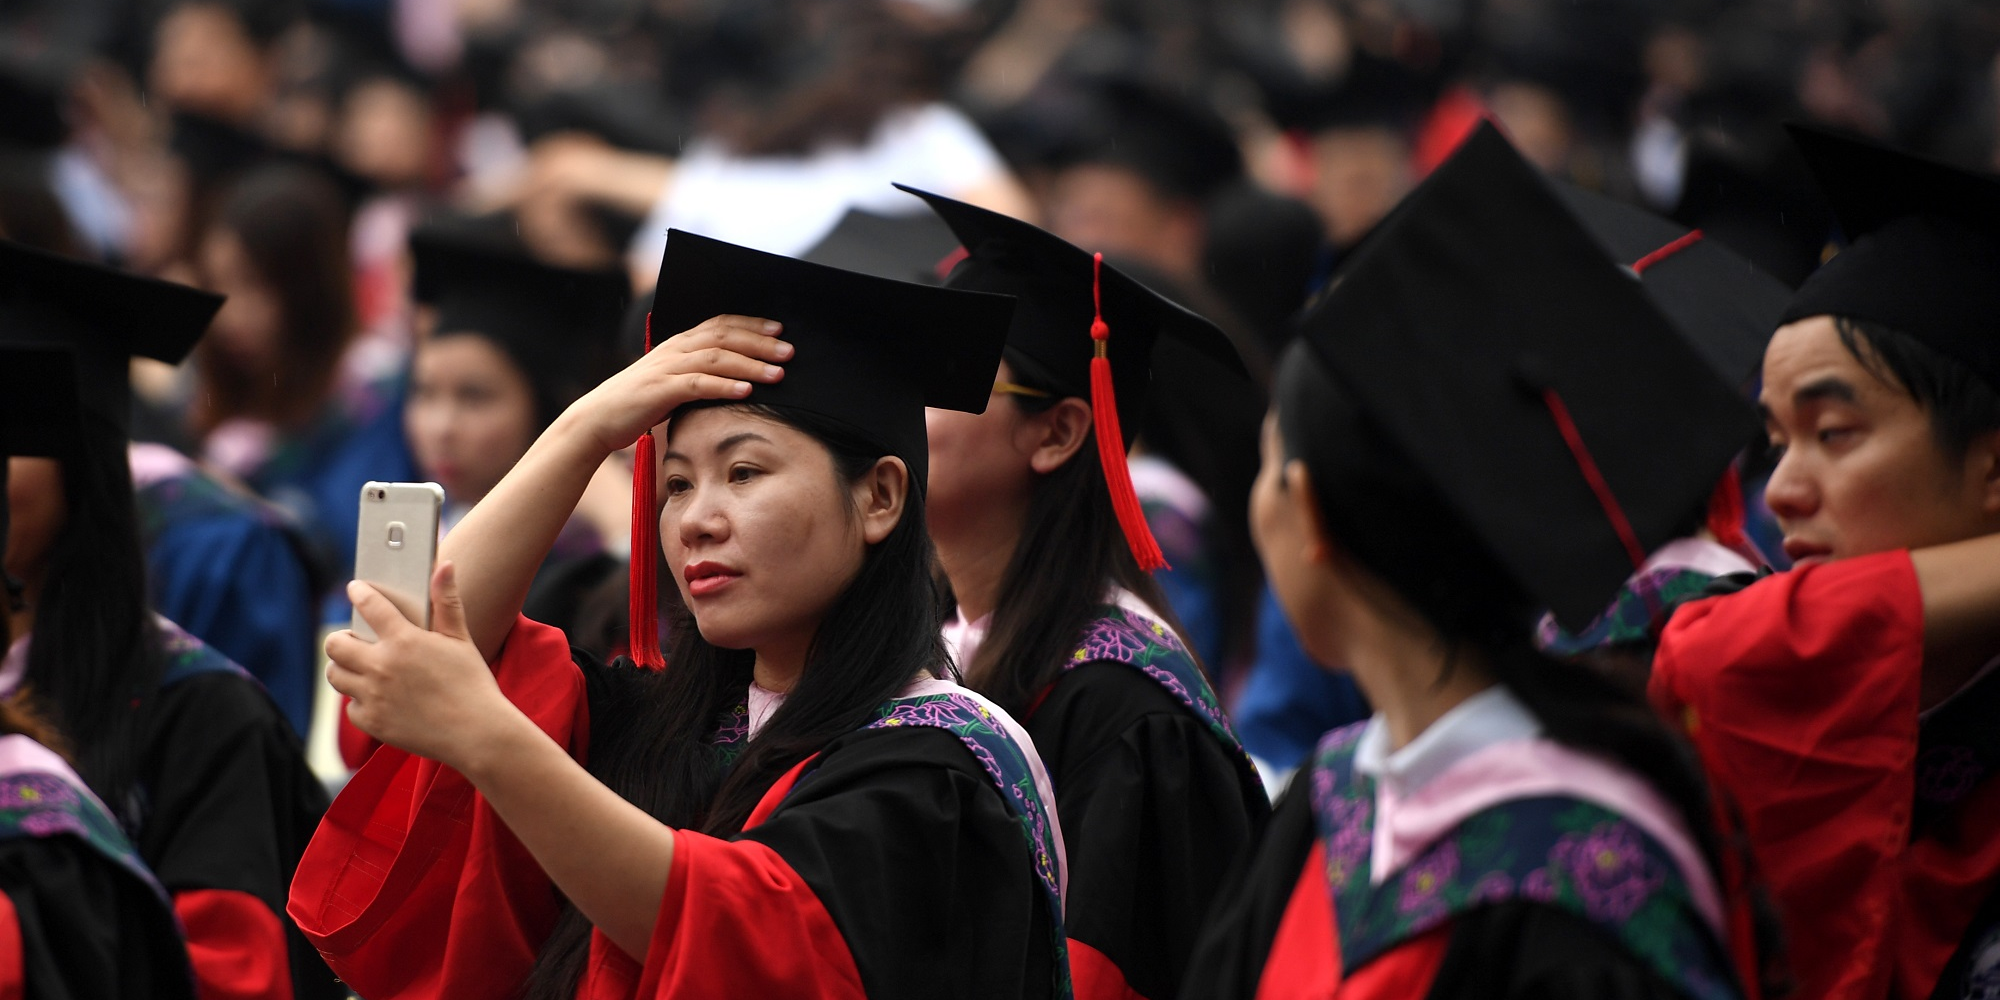 Graduates attend the graduation ceremony of Wuhan University on June 22, 2018 in Wuhan, Hubei Province of China.